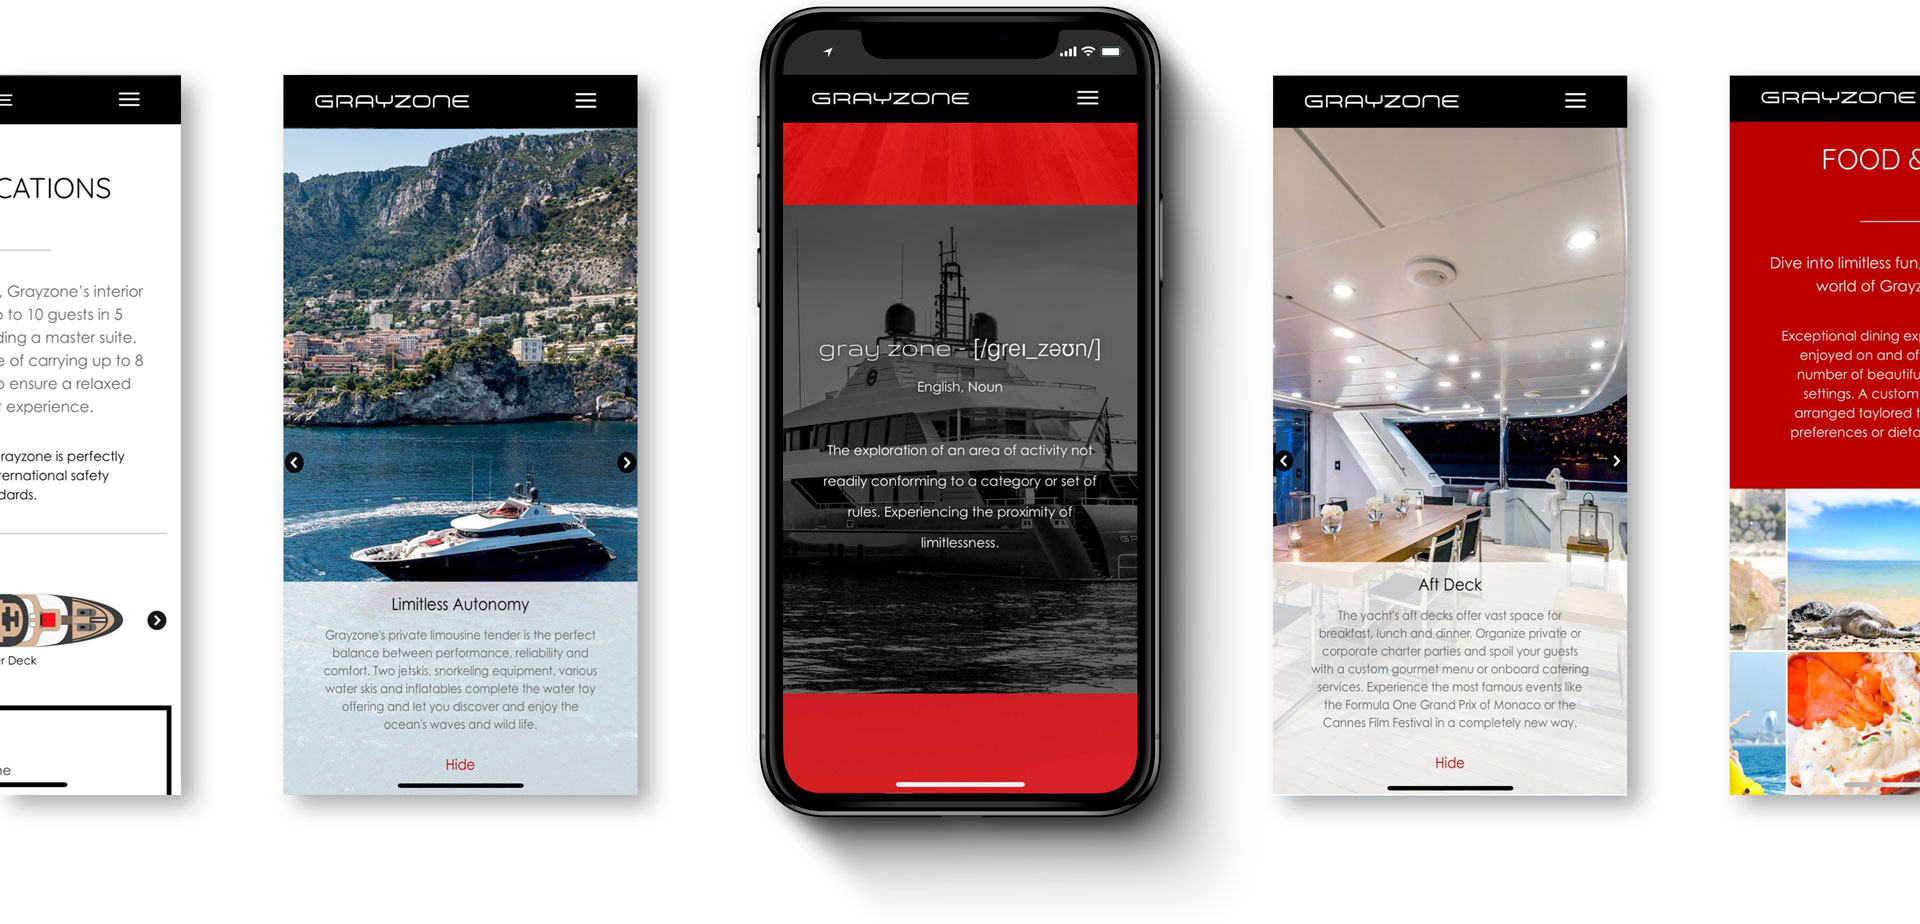 Grayzone super yacht web design for mobile devices